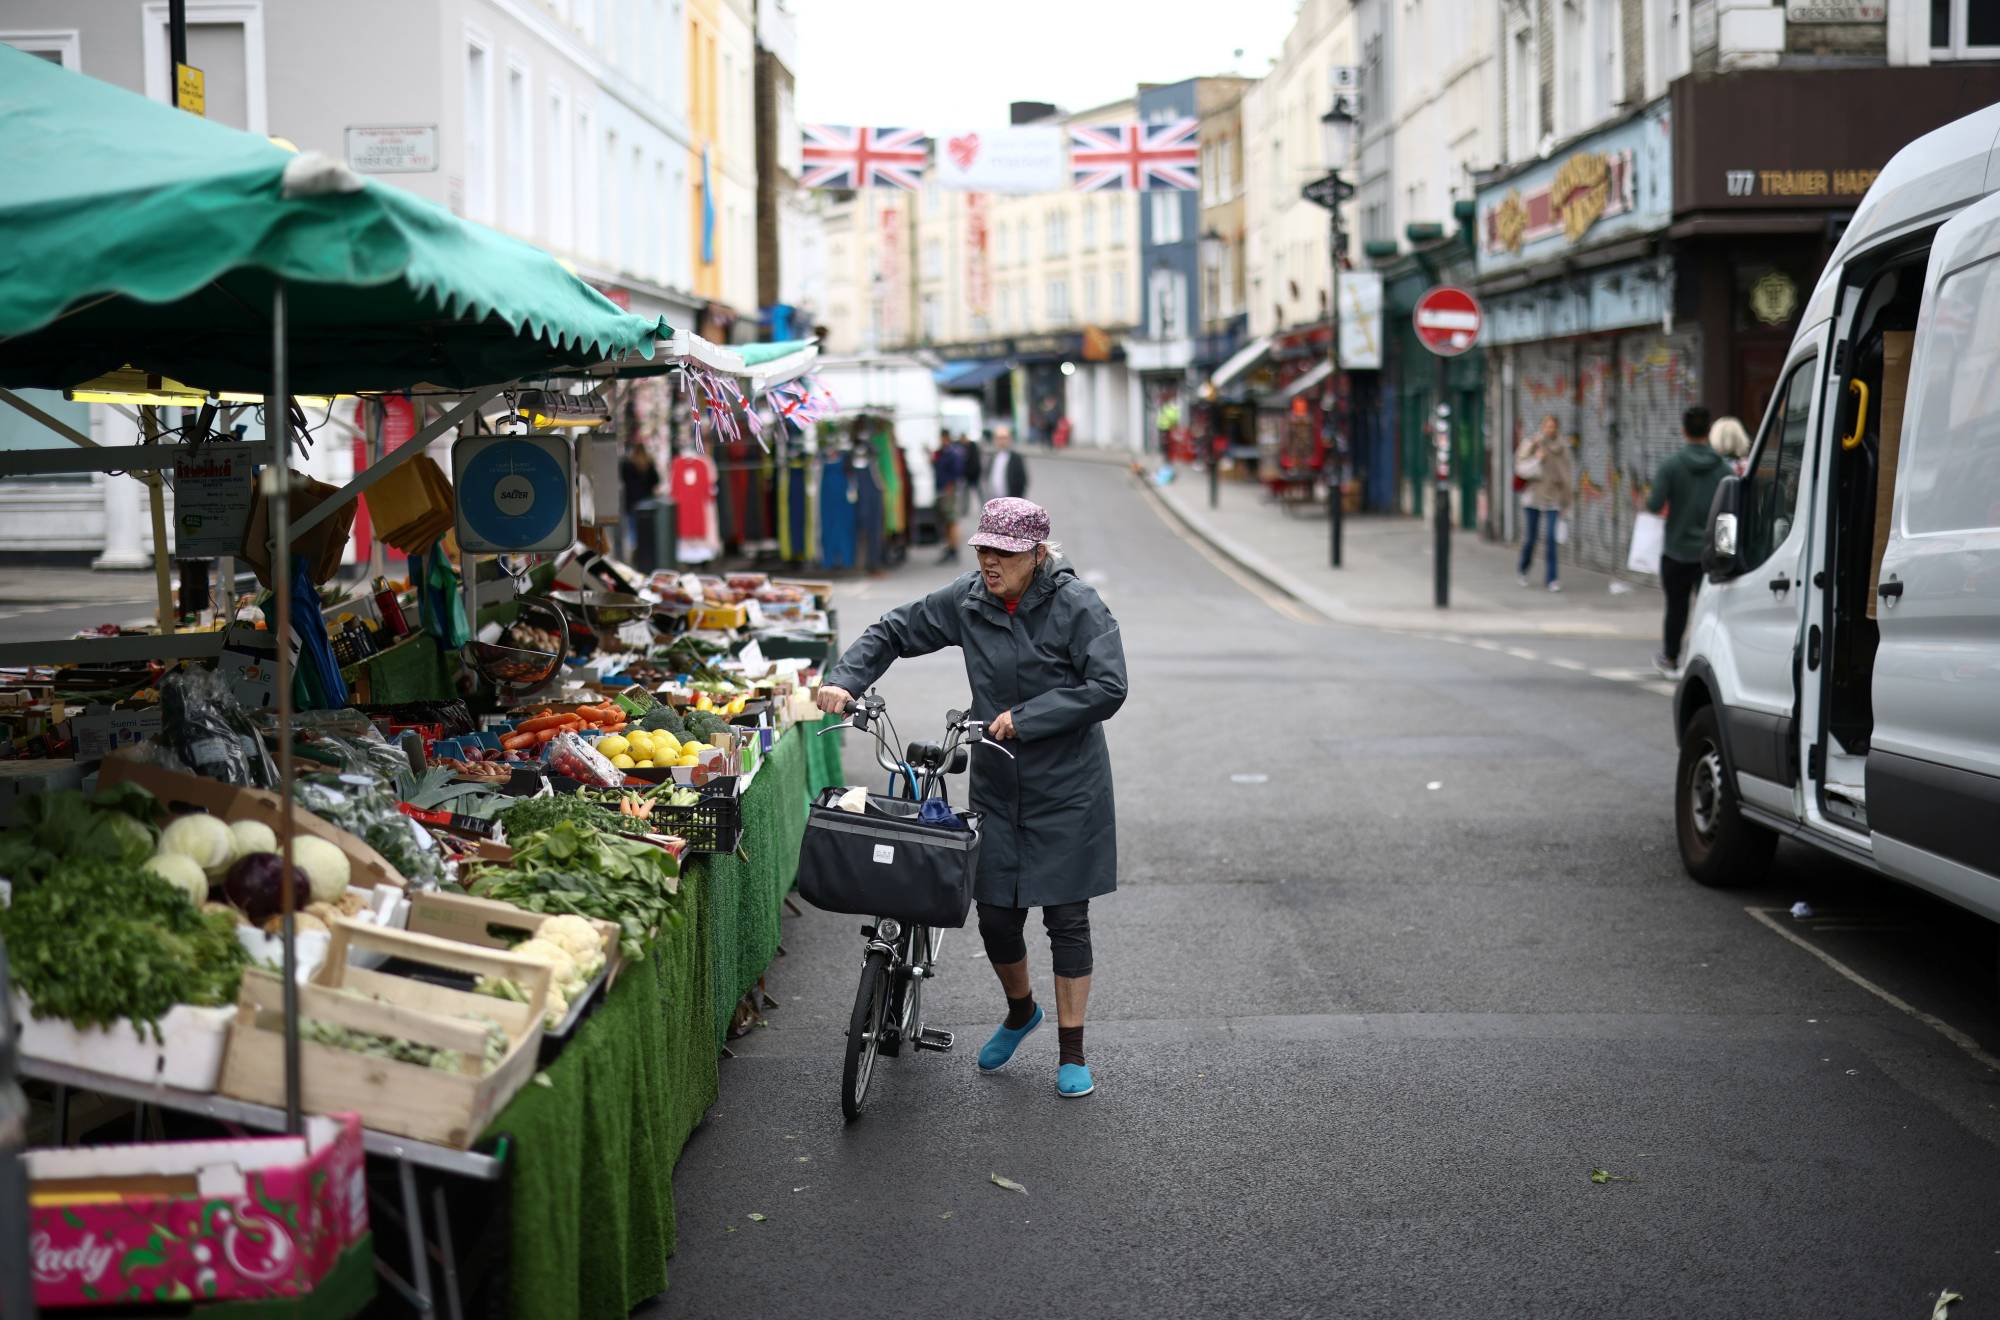 A customer views produce at a market stall on Portobello Road in London. | REUTERS